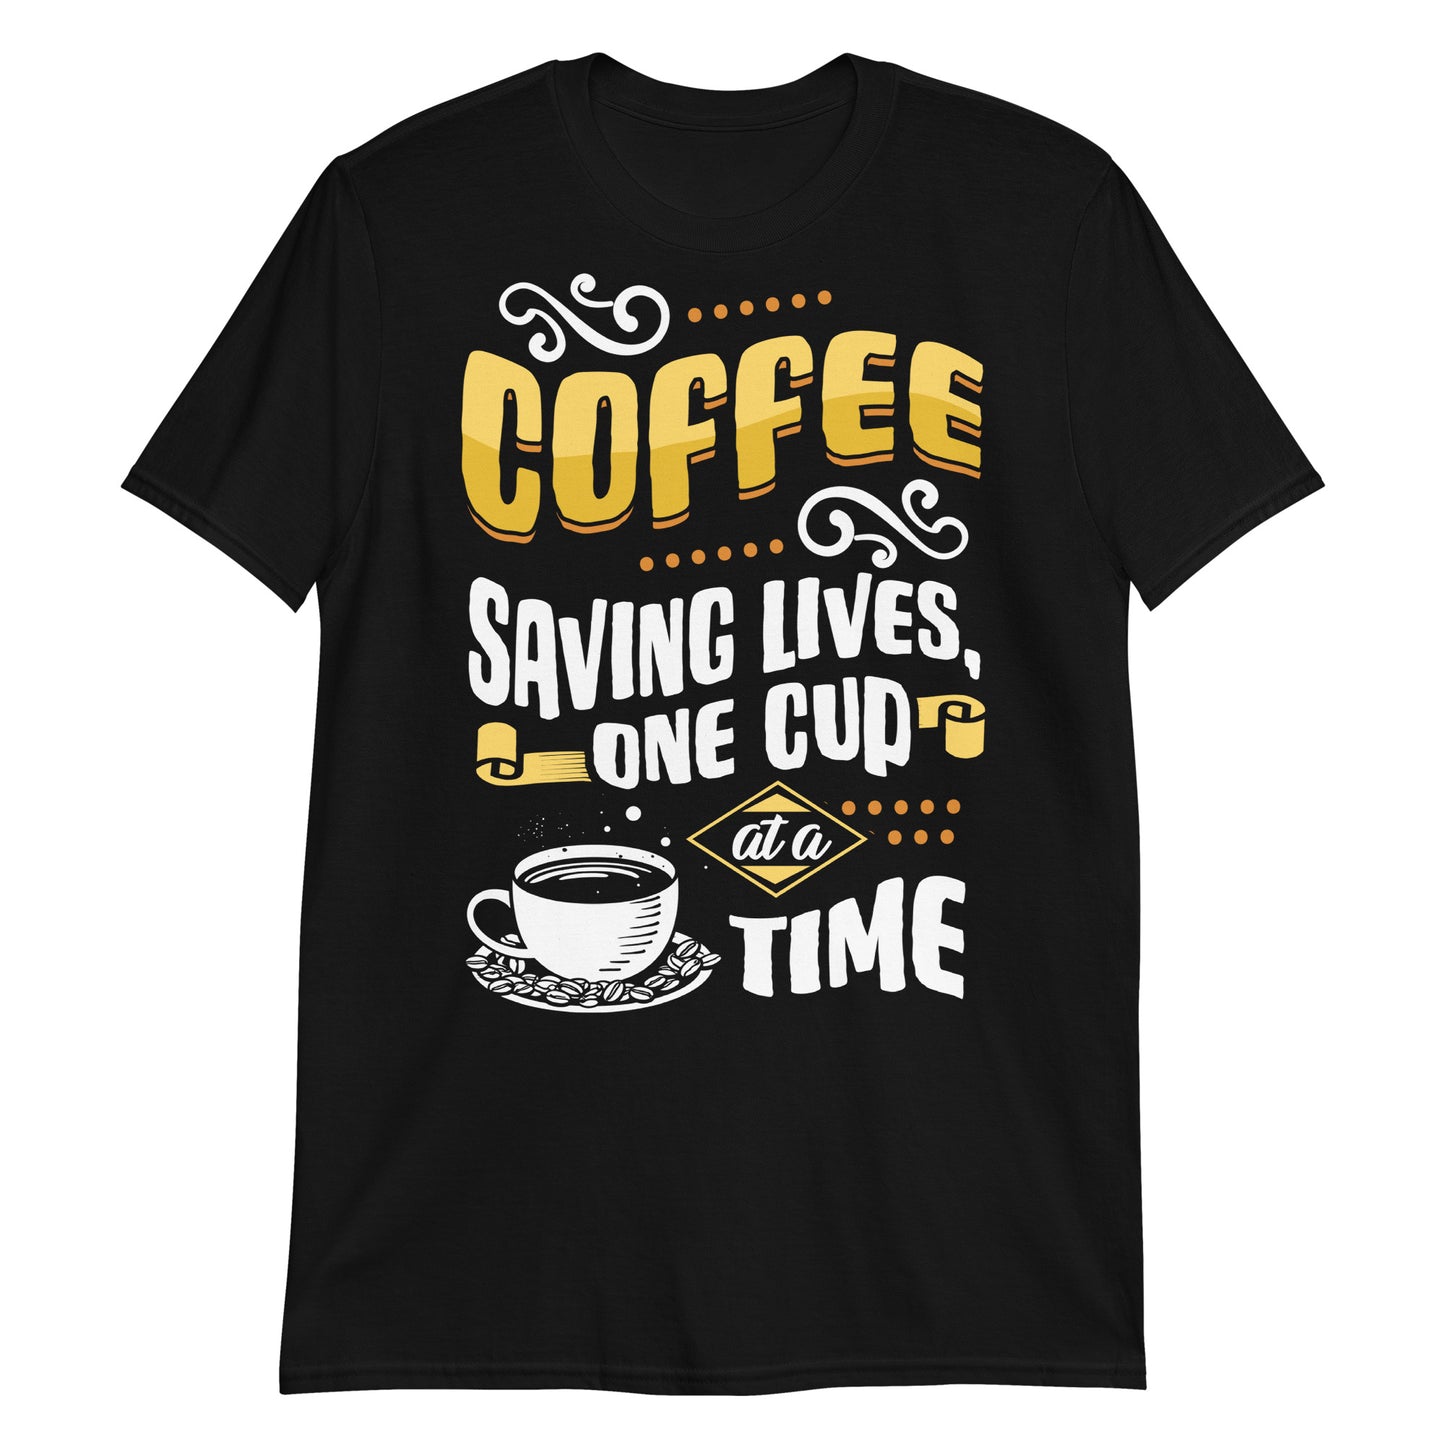 'Coffee - Saving Lives One Cup at a Time.' Short-Sleeve Unisex T-Shirt for Coffee Lovers